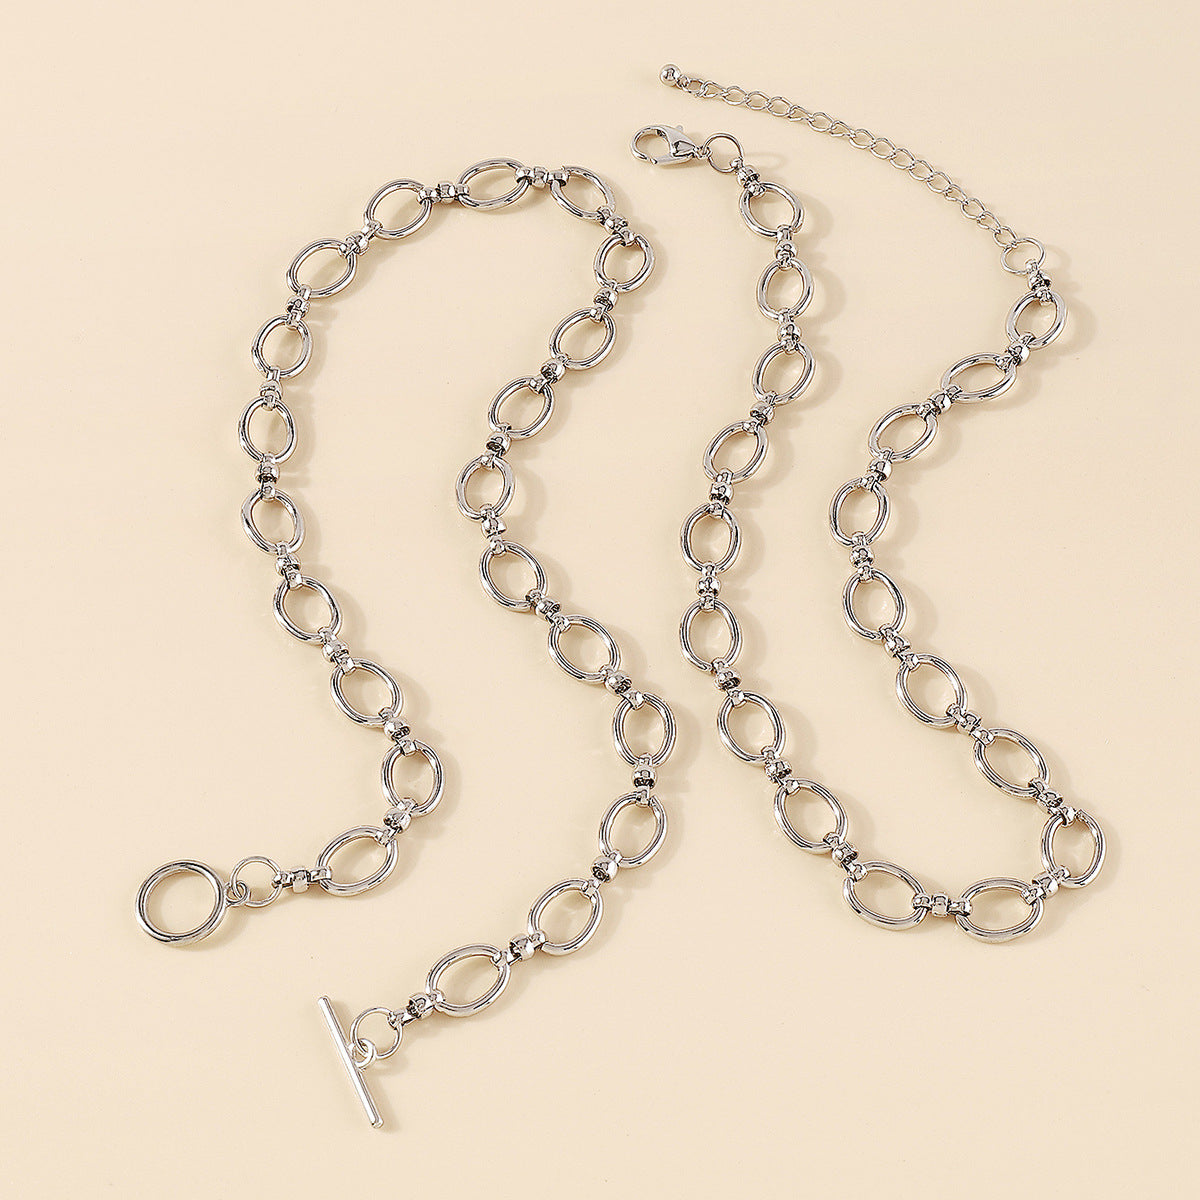 Silver-Plated Oval-Link Chain Set